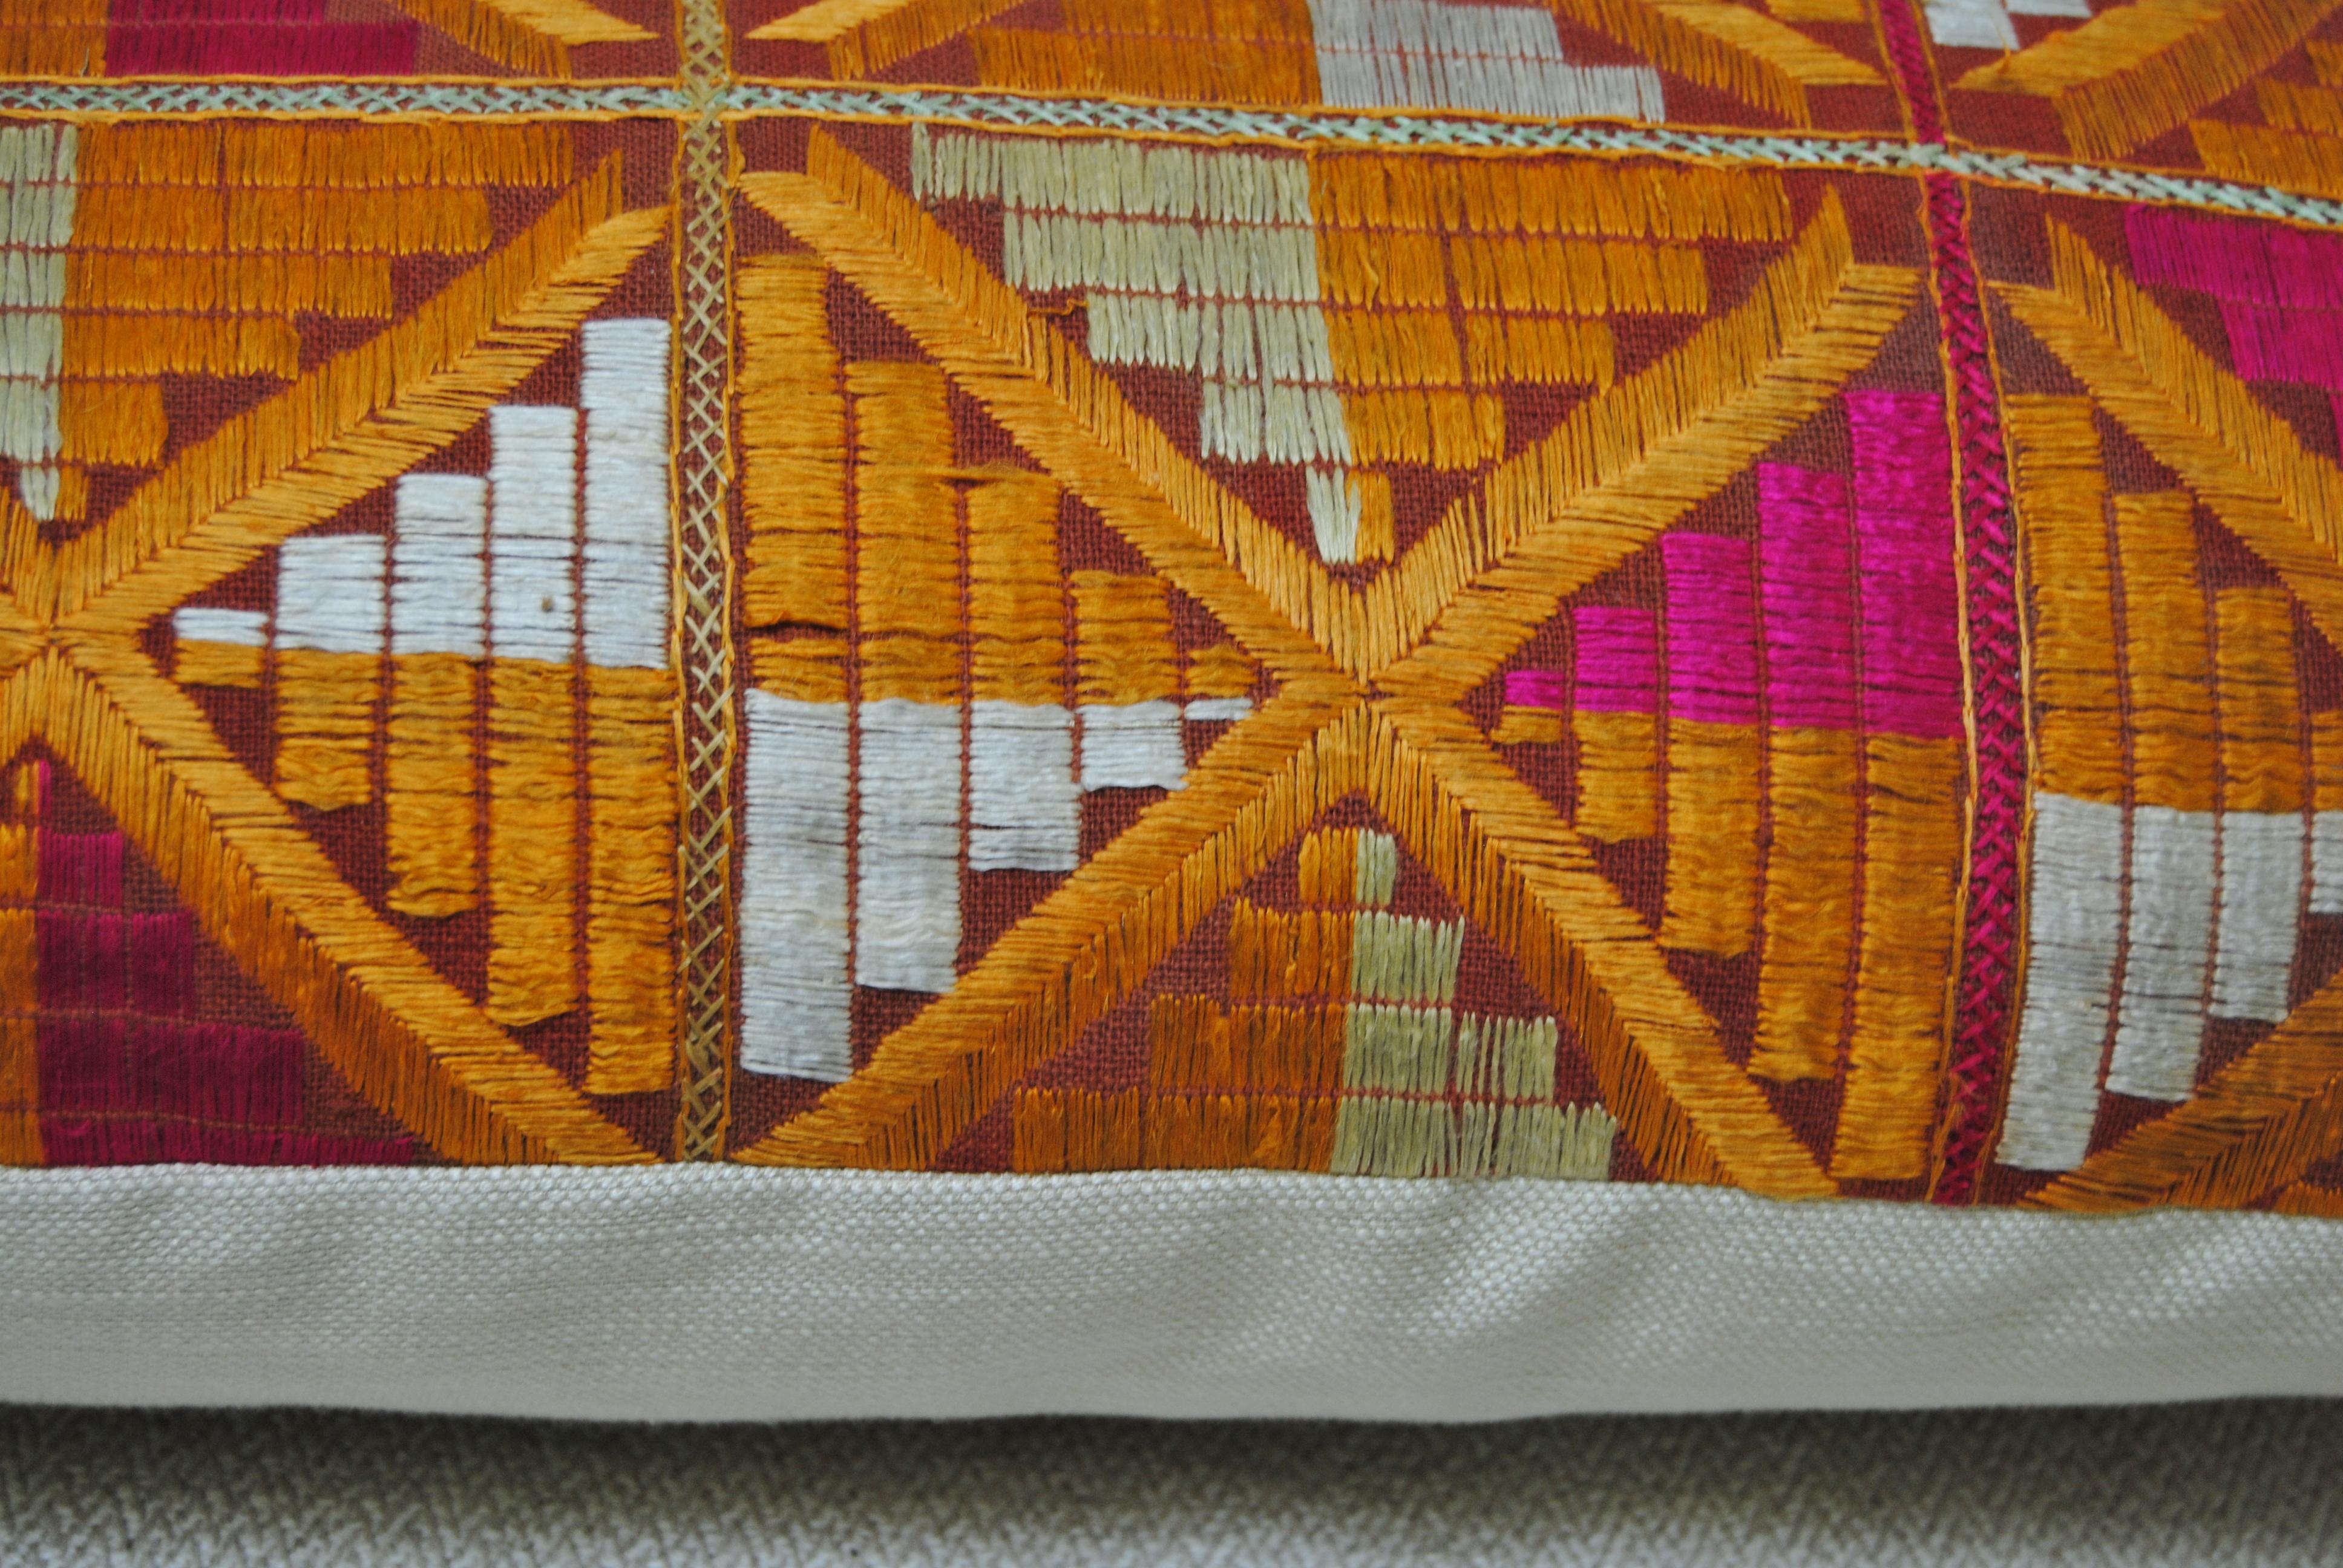 Custom pillow cut from a vintage Phulkari Bagh wedding shawl from Punjab, India. The hand loomed cotton khadi cloth shawl is hand embroidered with vibrant silk threads by relatives of the young girl for her wedding and other special occasions. The